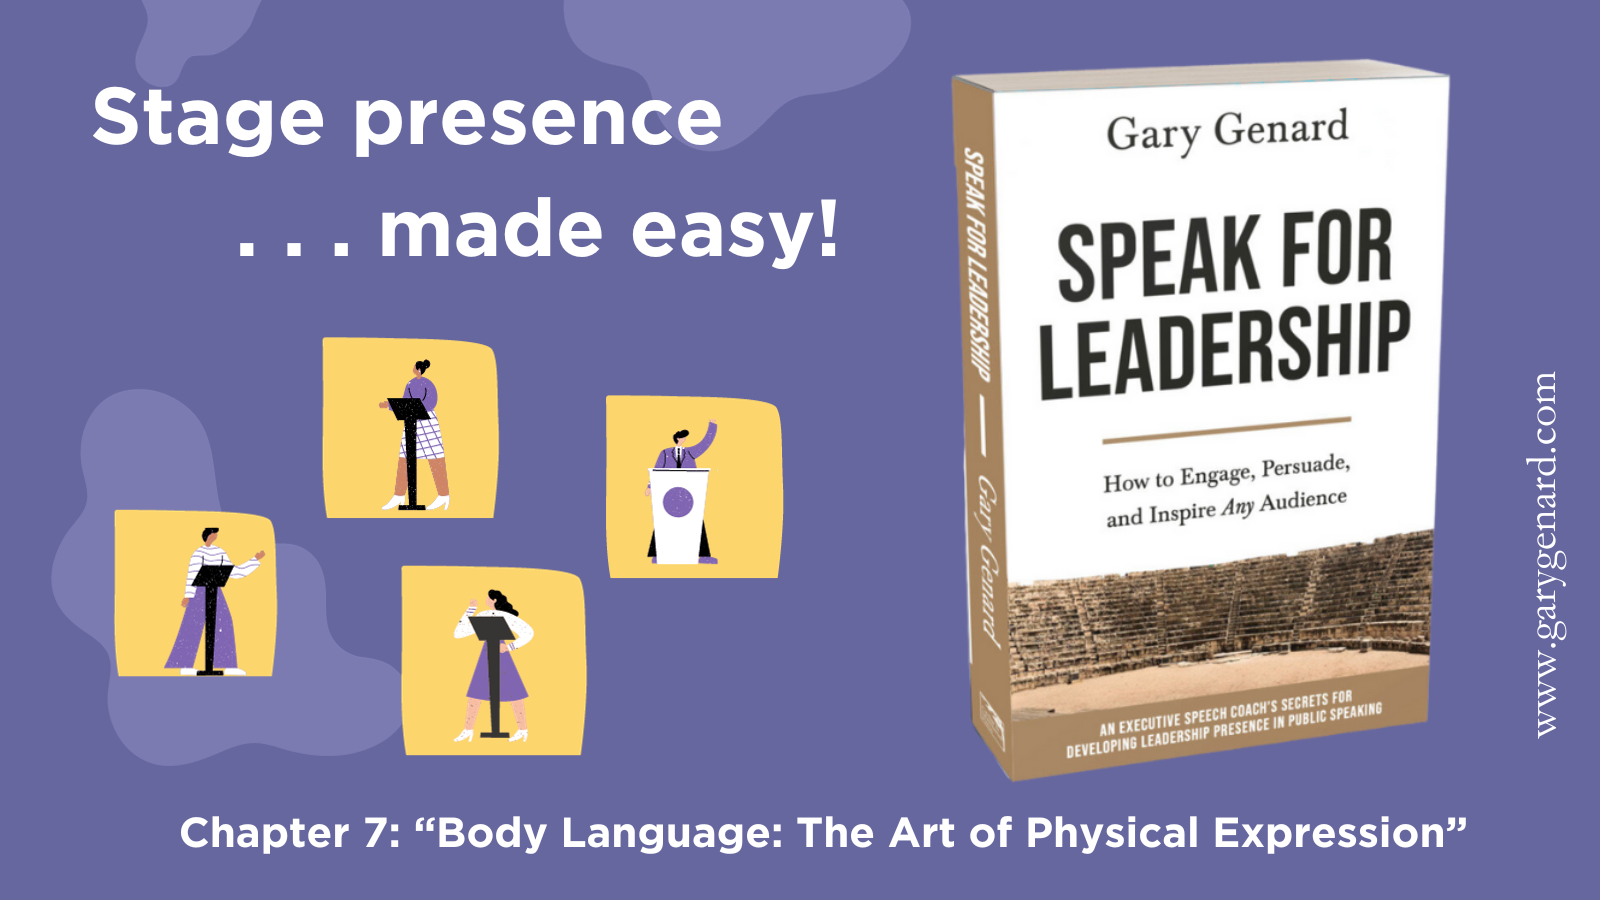 Learn how to use body language in public speaking, in Dr. Gary Genard's book, Speak for Leadership.